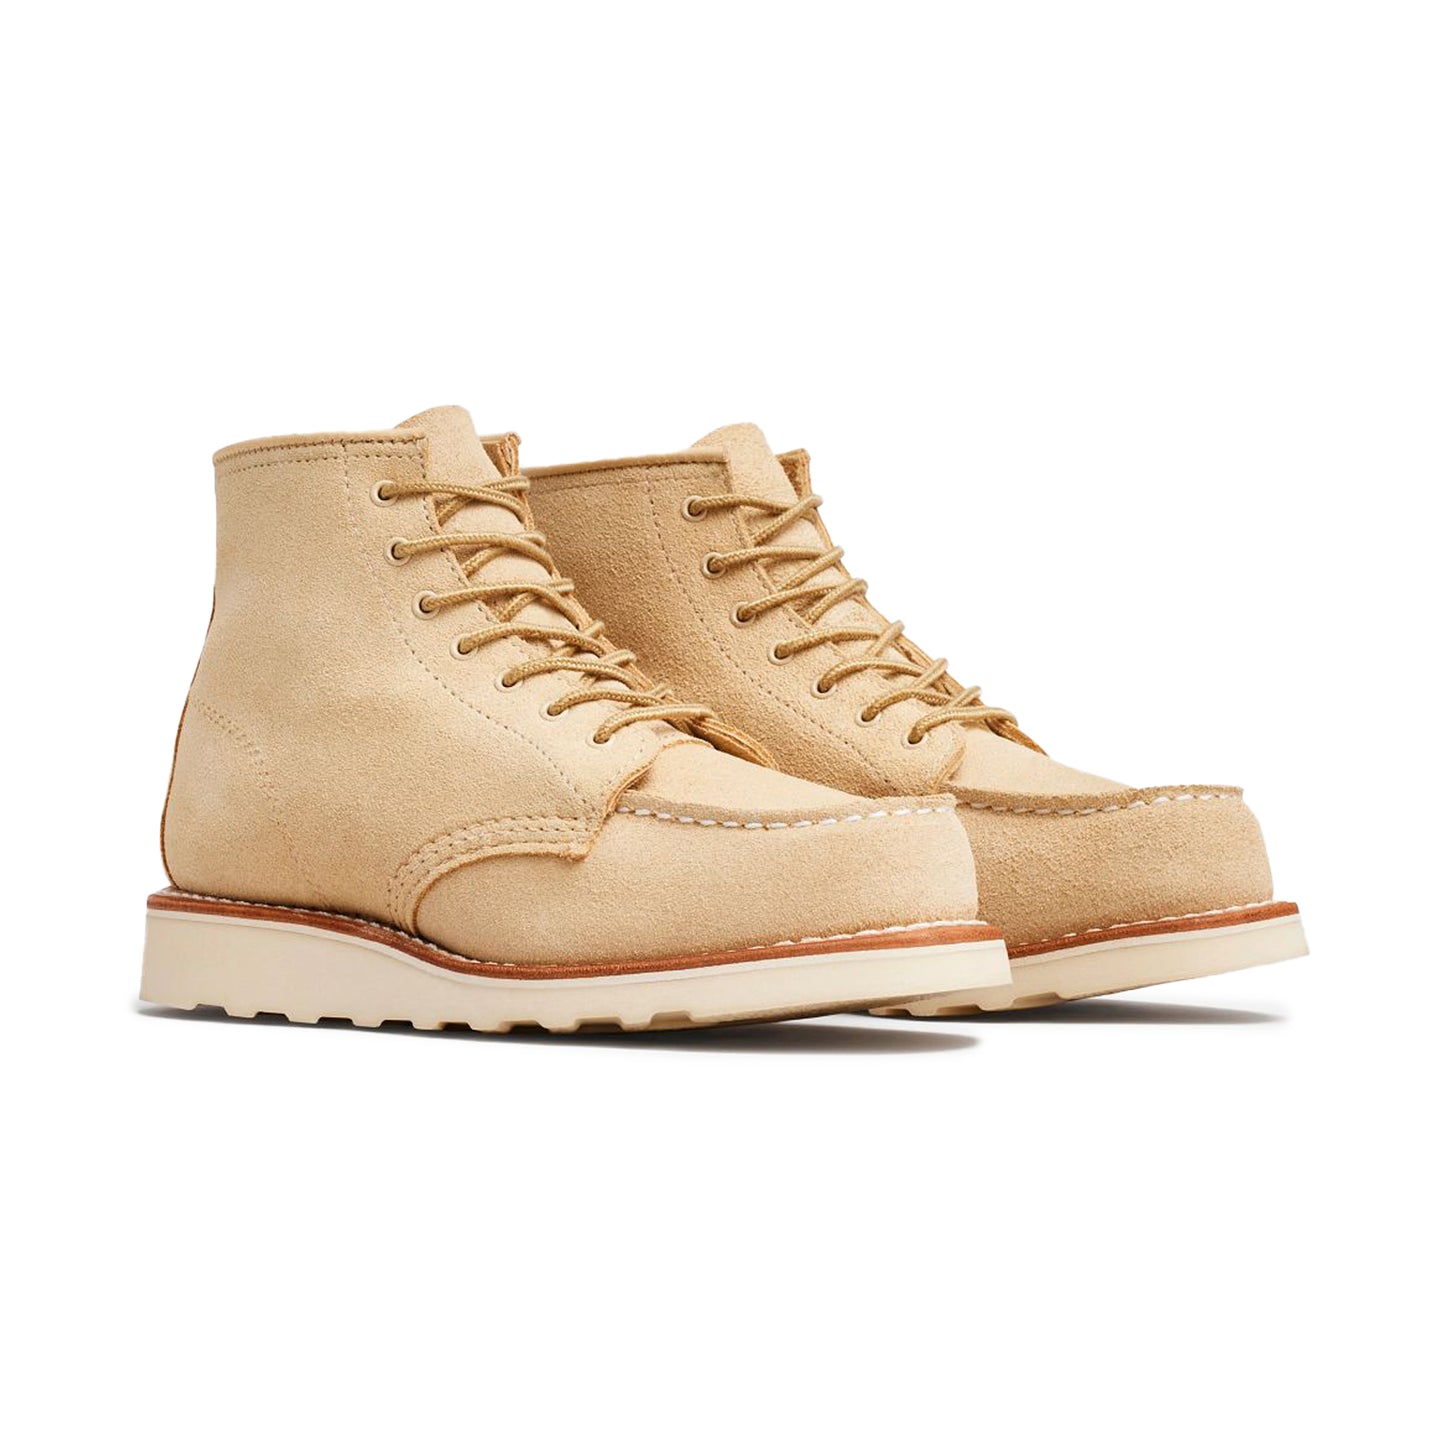 Red Wing Heritage Womens Classic Moc